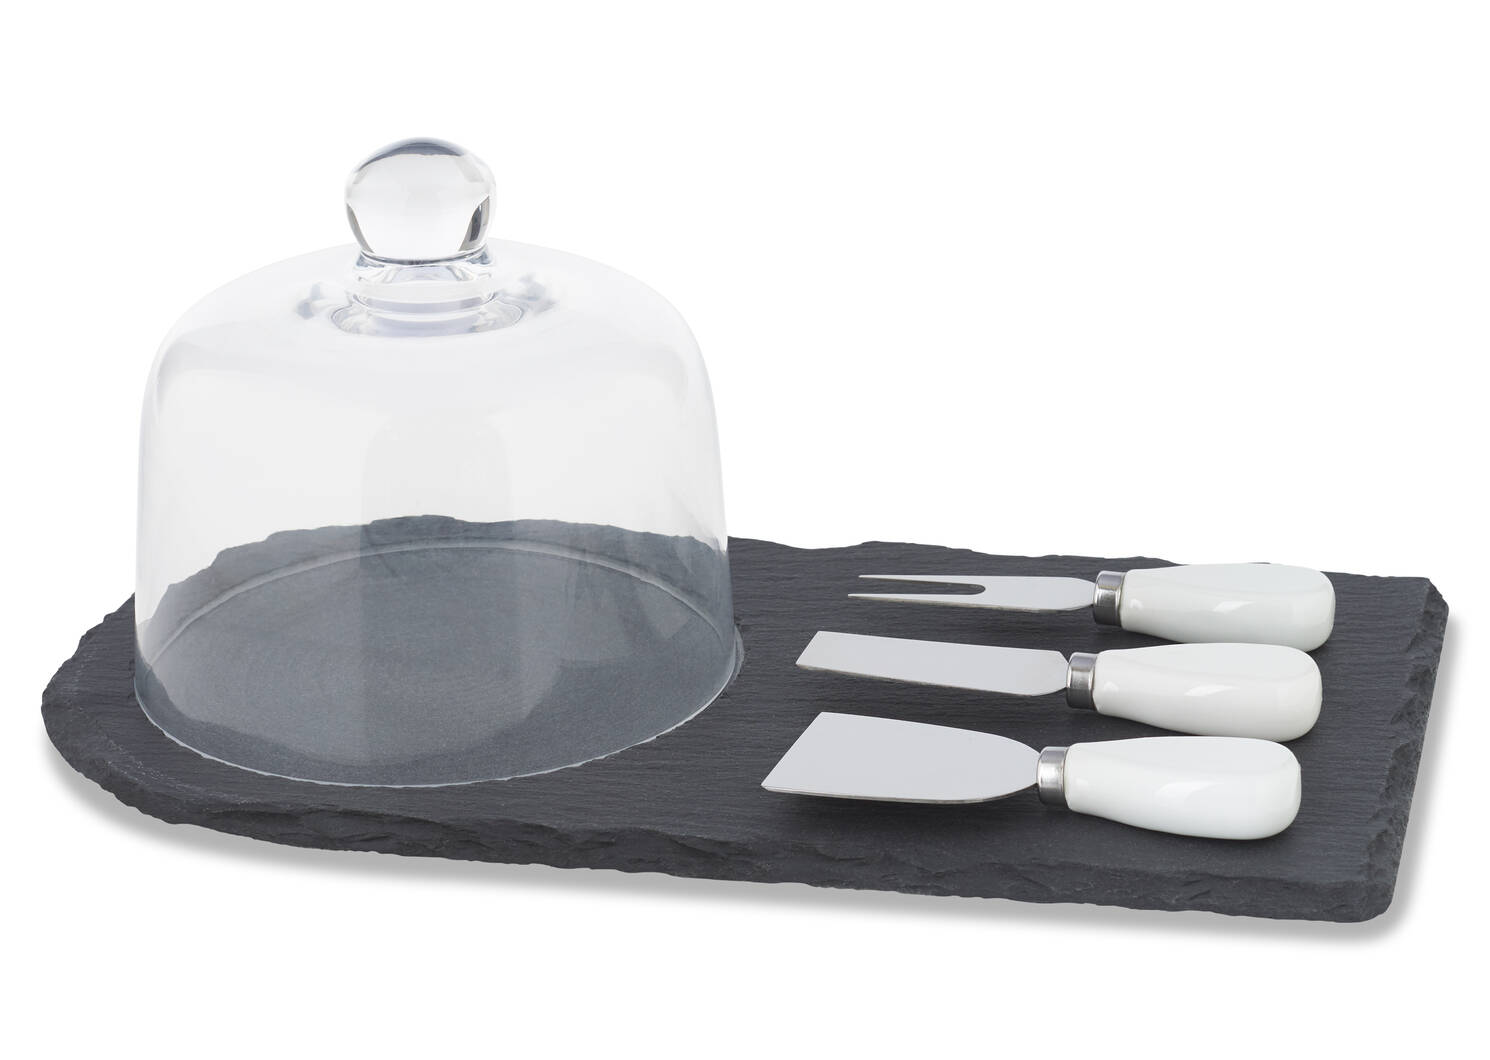 Boca Cheese Set with Glass Dome